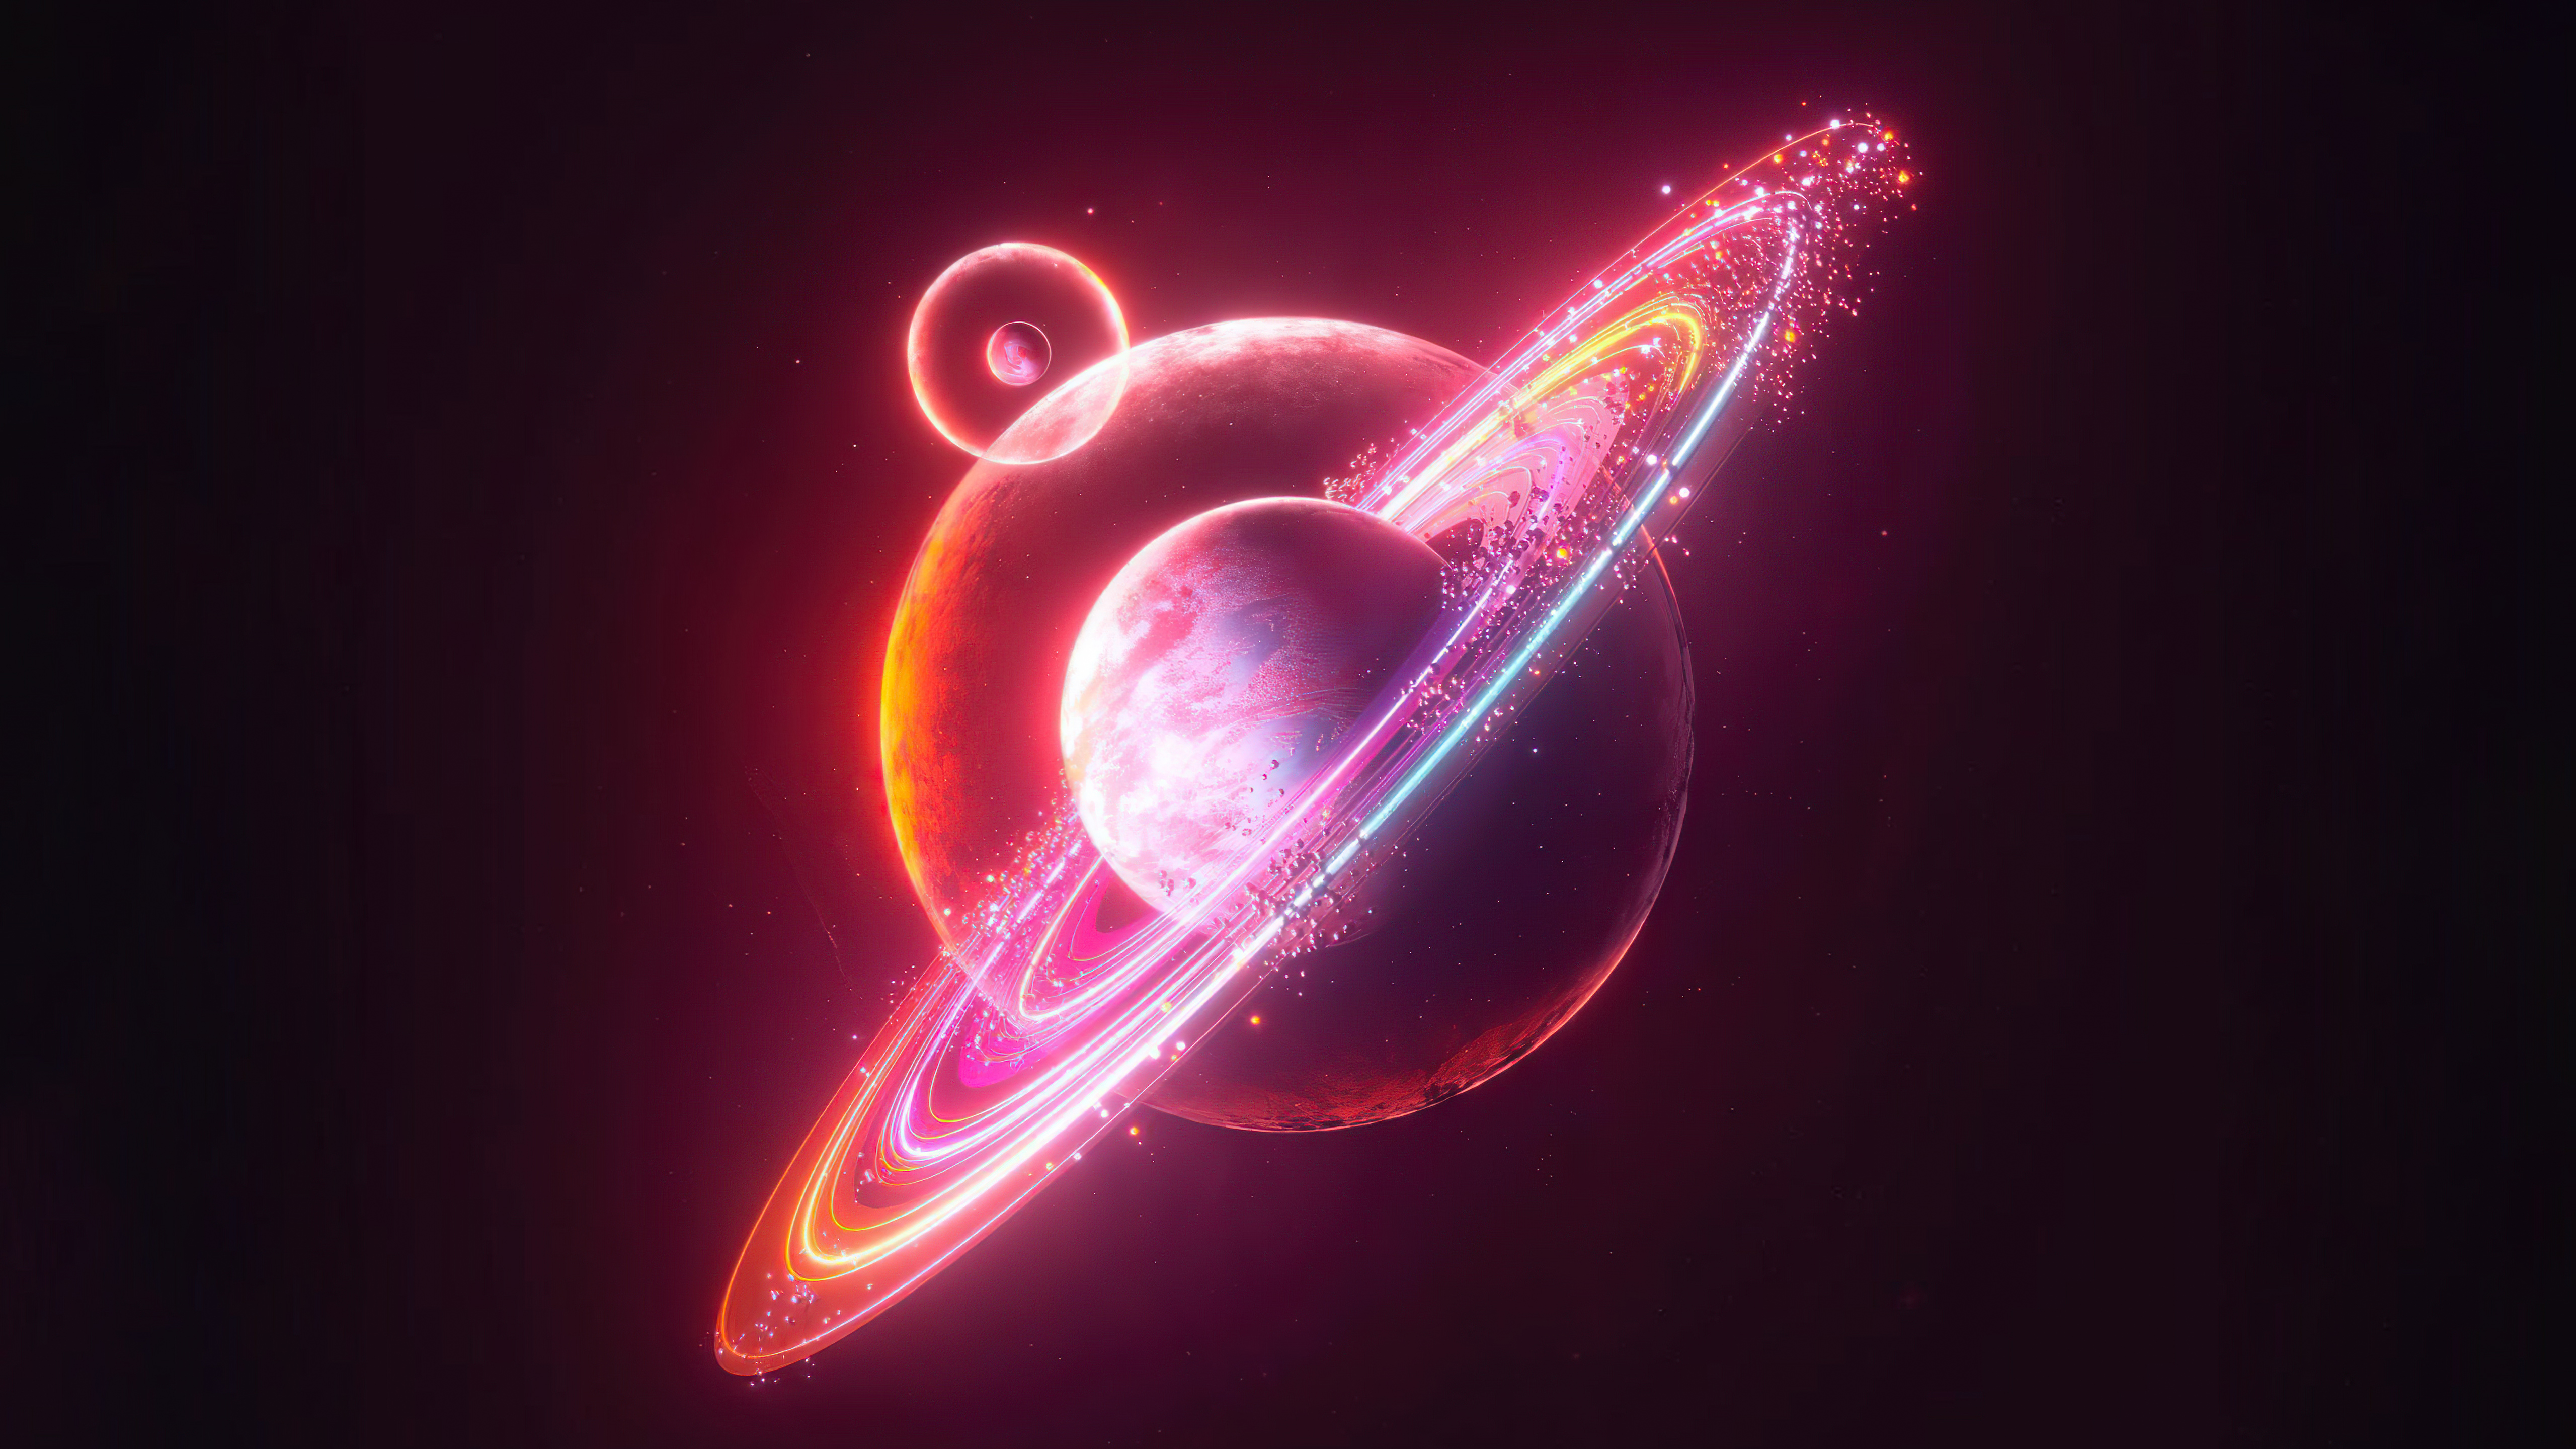 Saturn Planet Background Images HD Pictures and Wallpaper For Free  Download  Pngtree